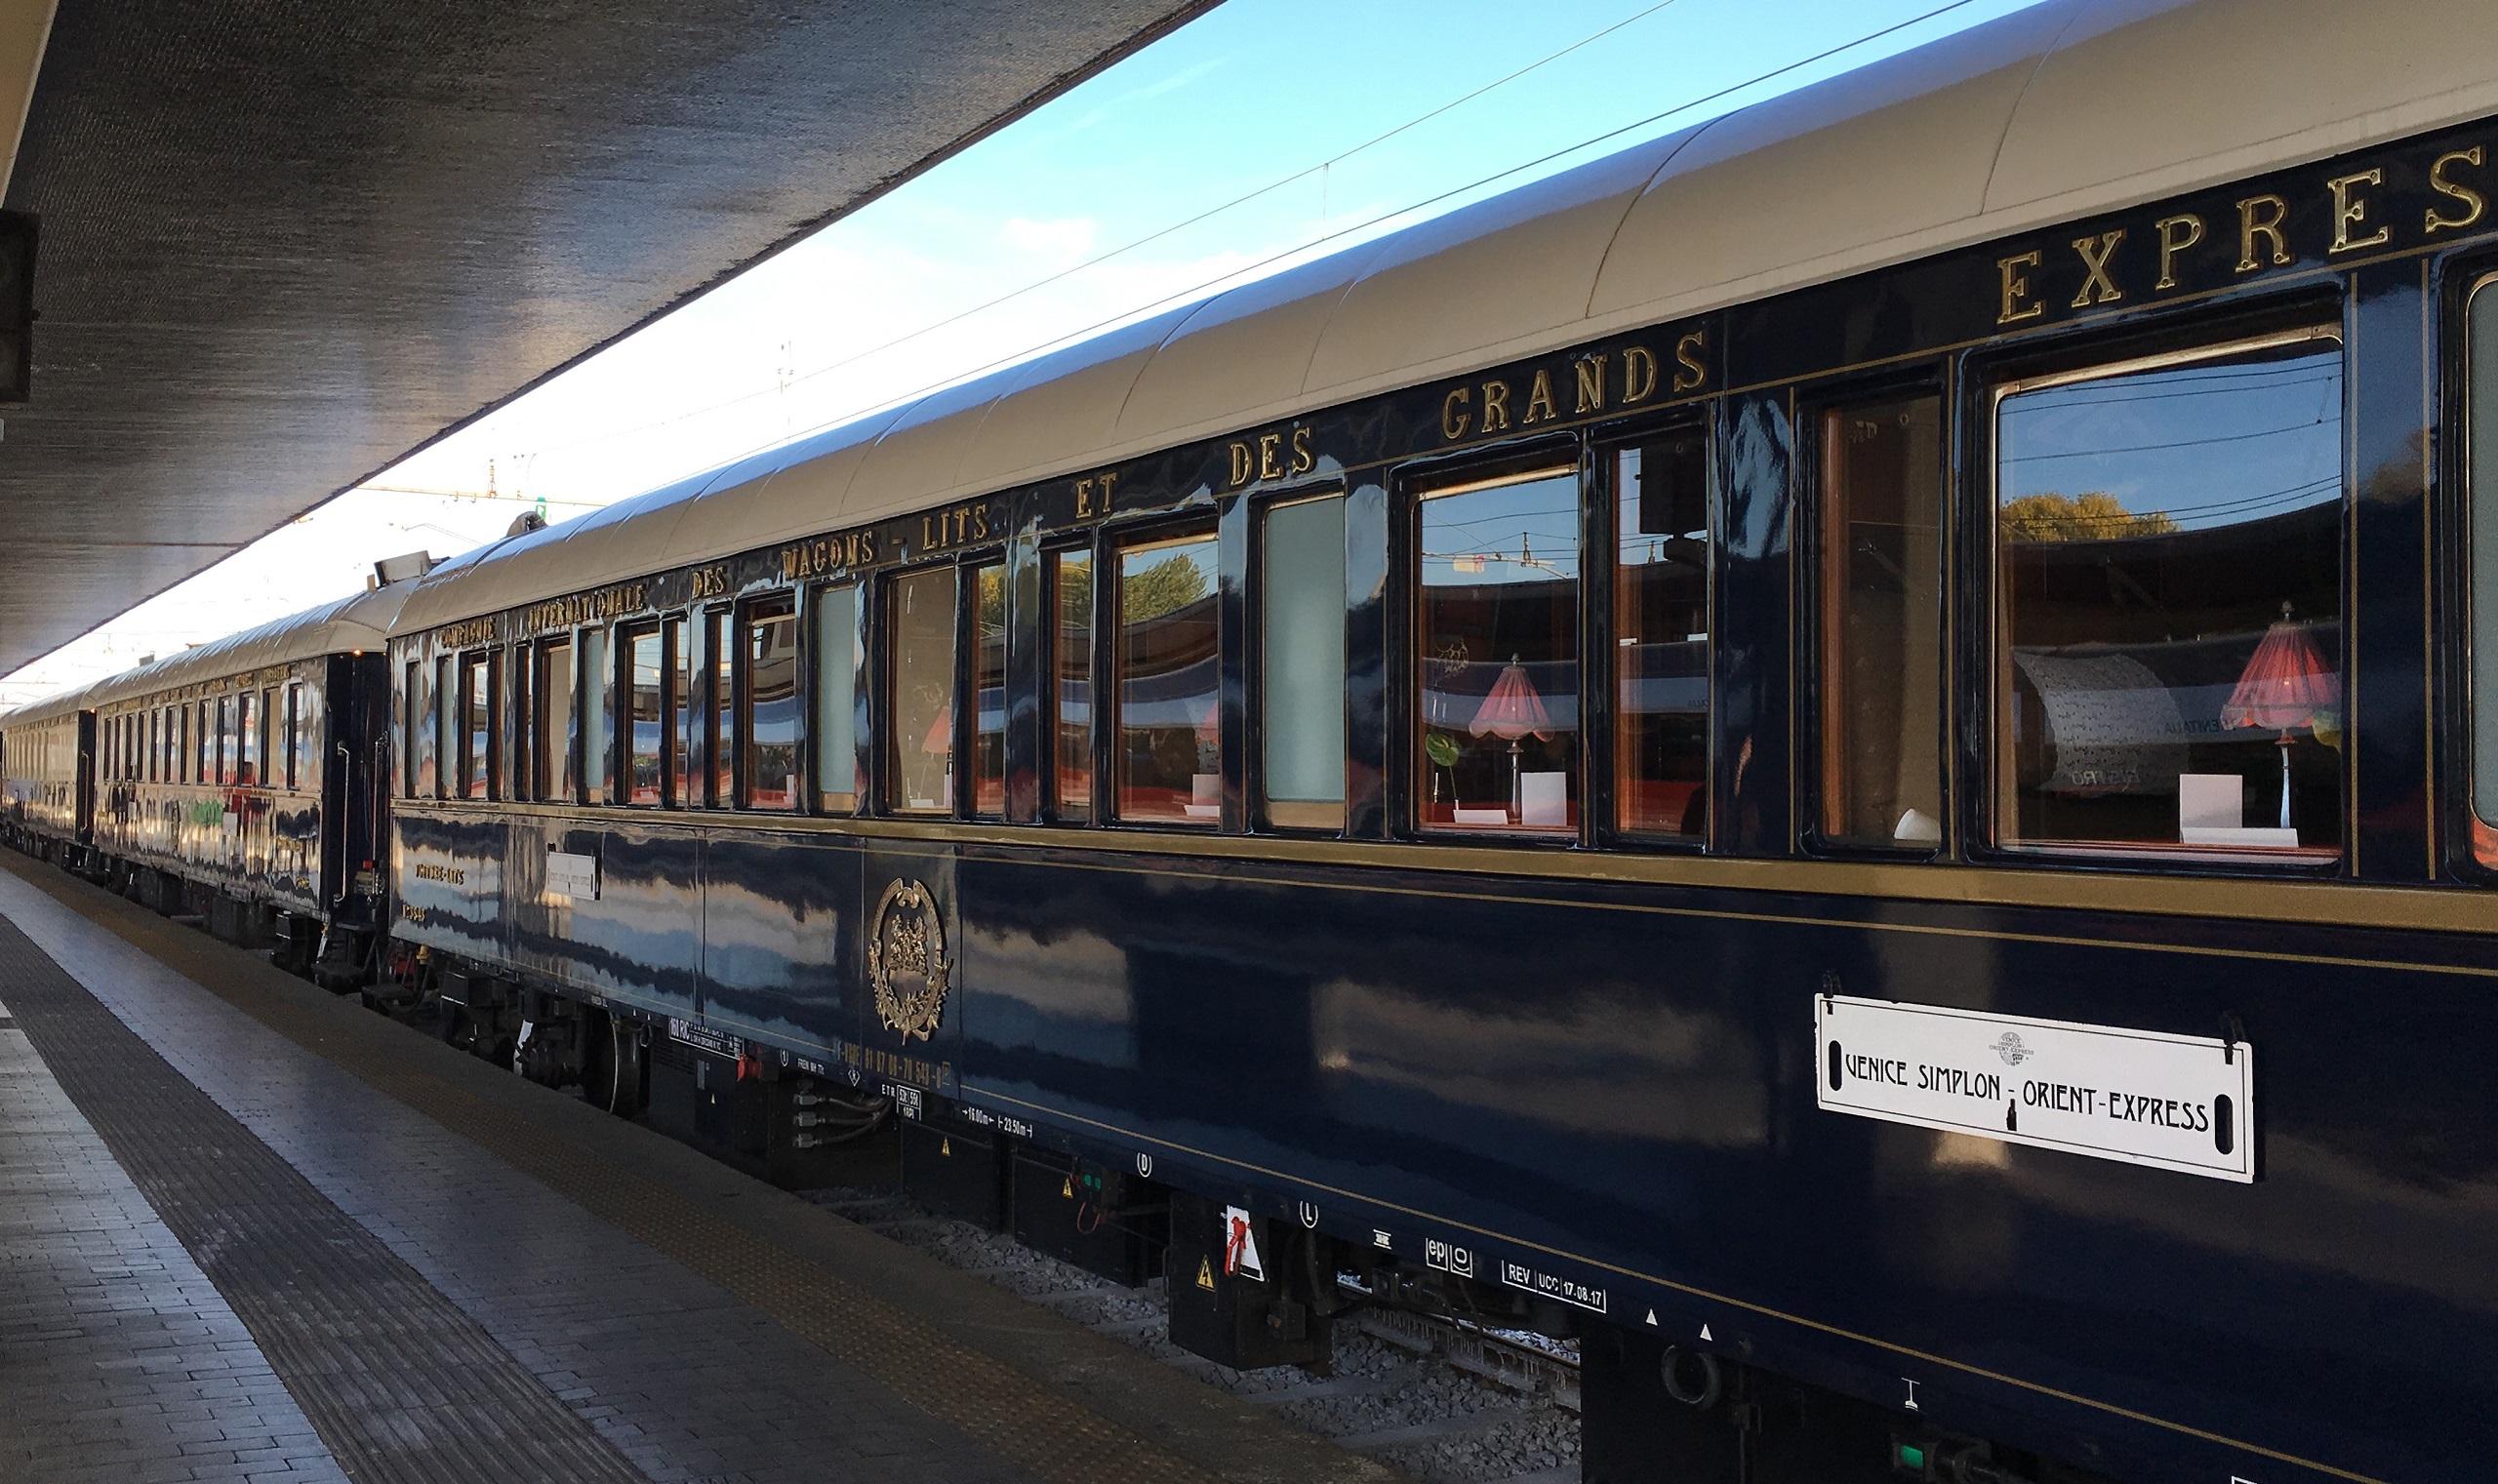 Murder on the Orient Express: Where it all began